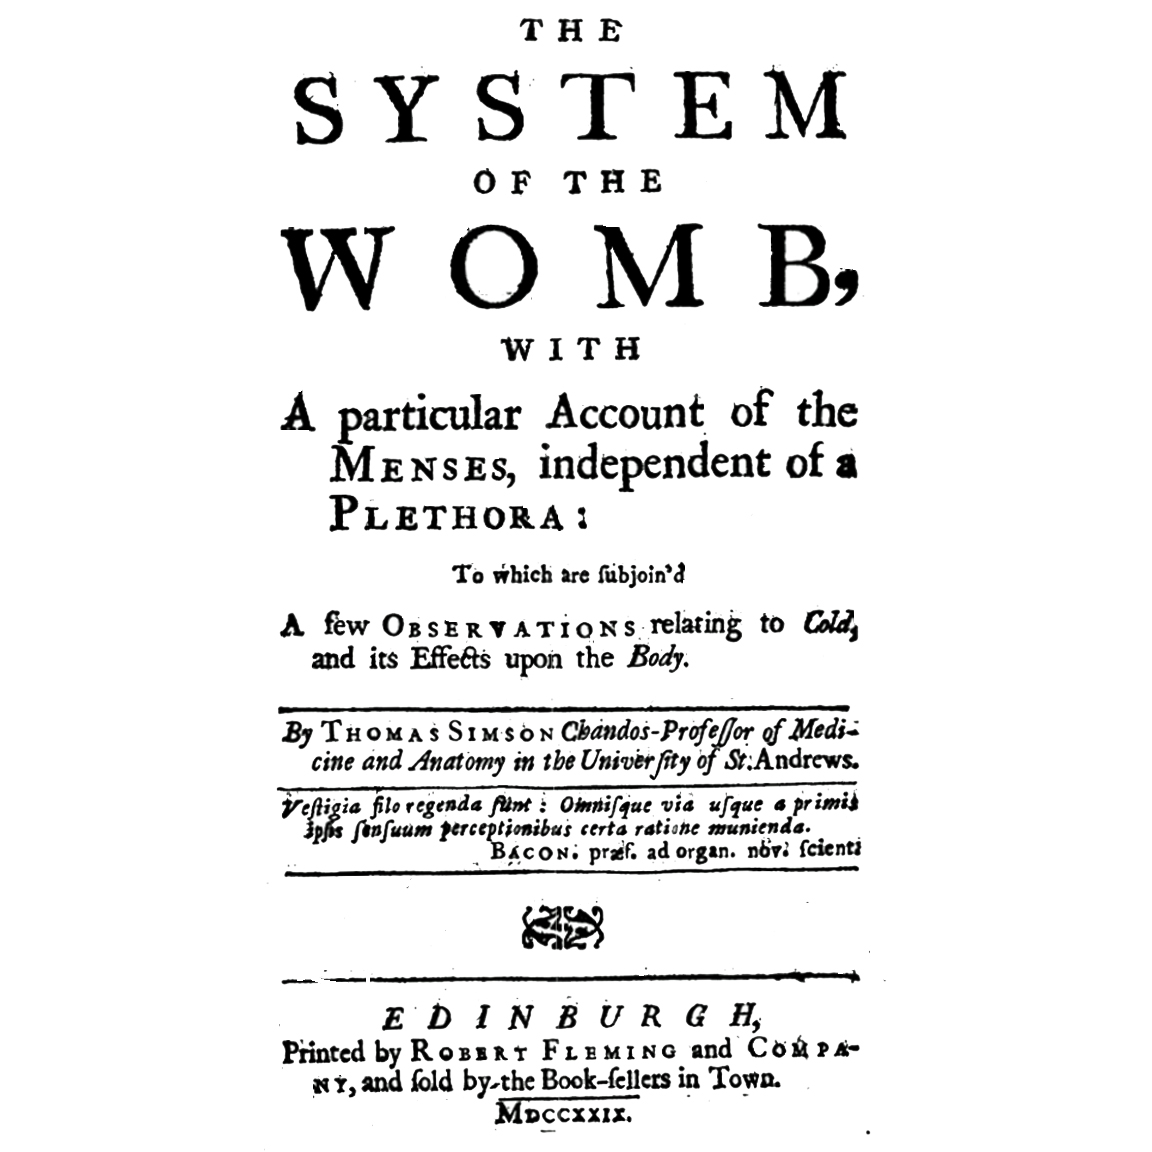 1729-SIMSON-System of the Womb-title